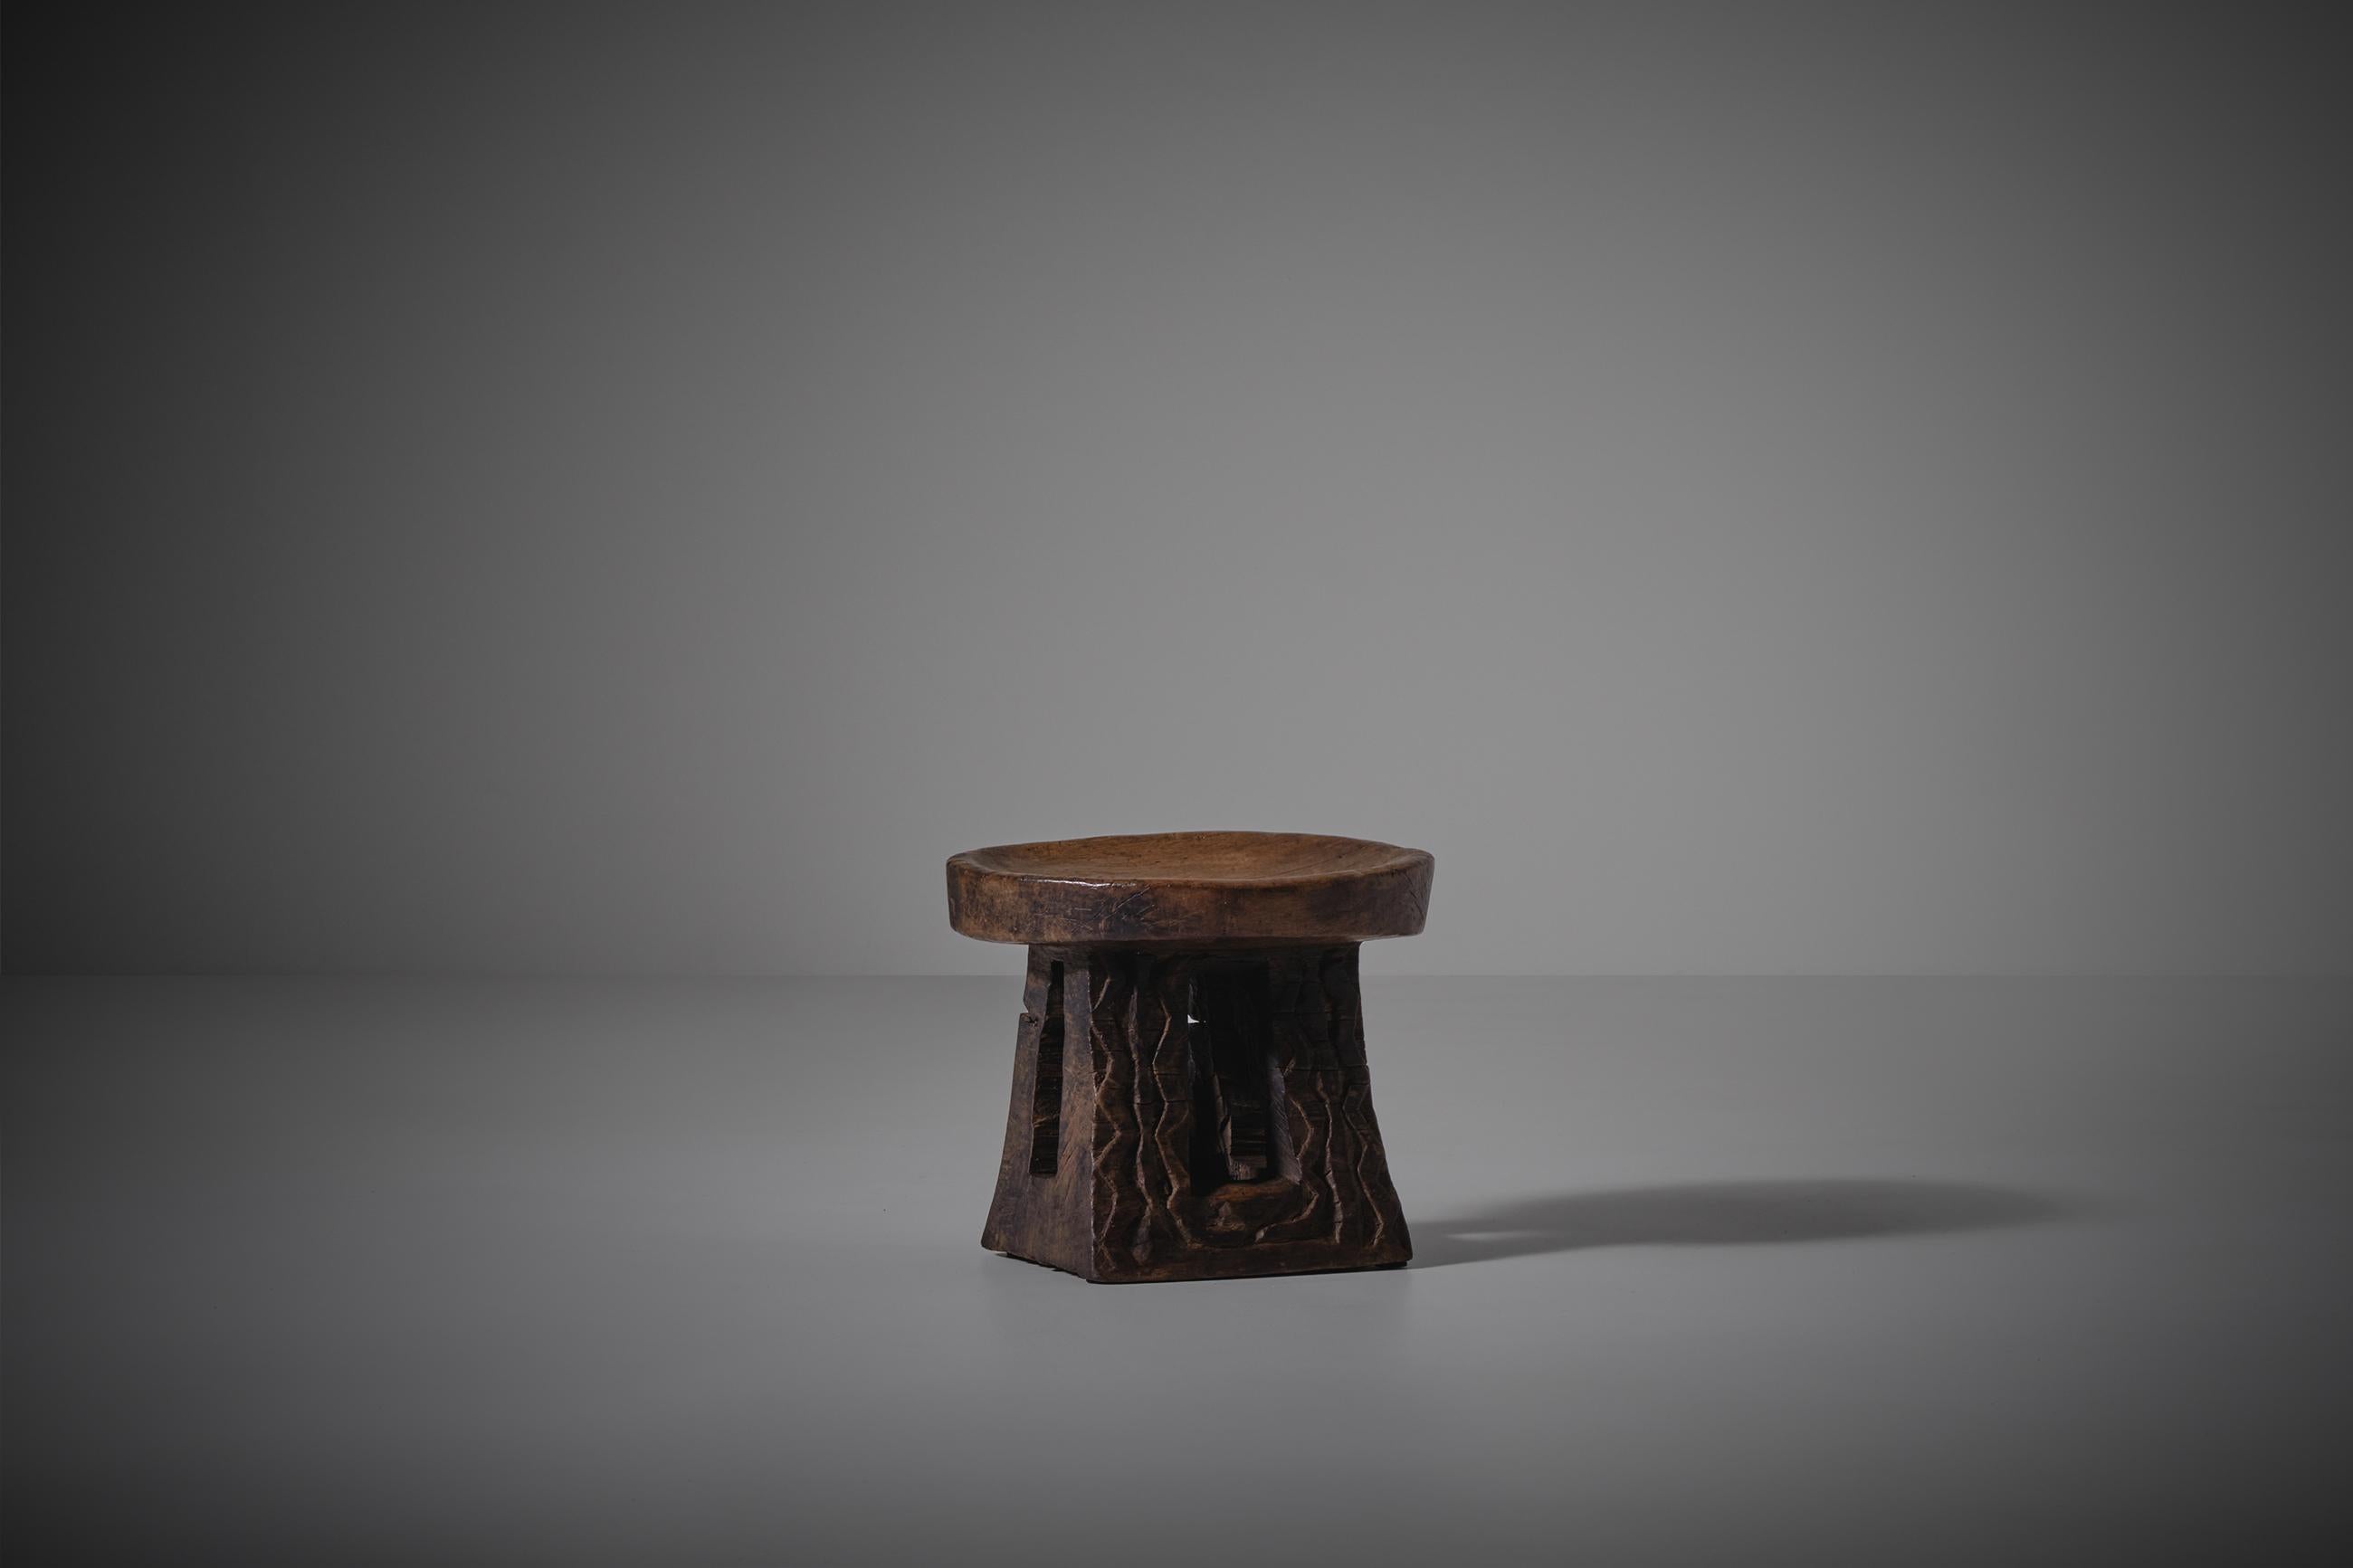 African Wooden 'Bamileke' stool, early XX century. The stool is a traditional art populair from Cameroon. These hand-carved stools have long been used as ceremonial seating to indicate the status and power of tribal chiefs and kings. Each stool is